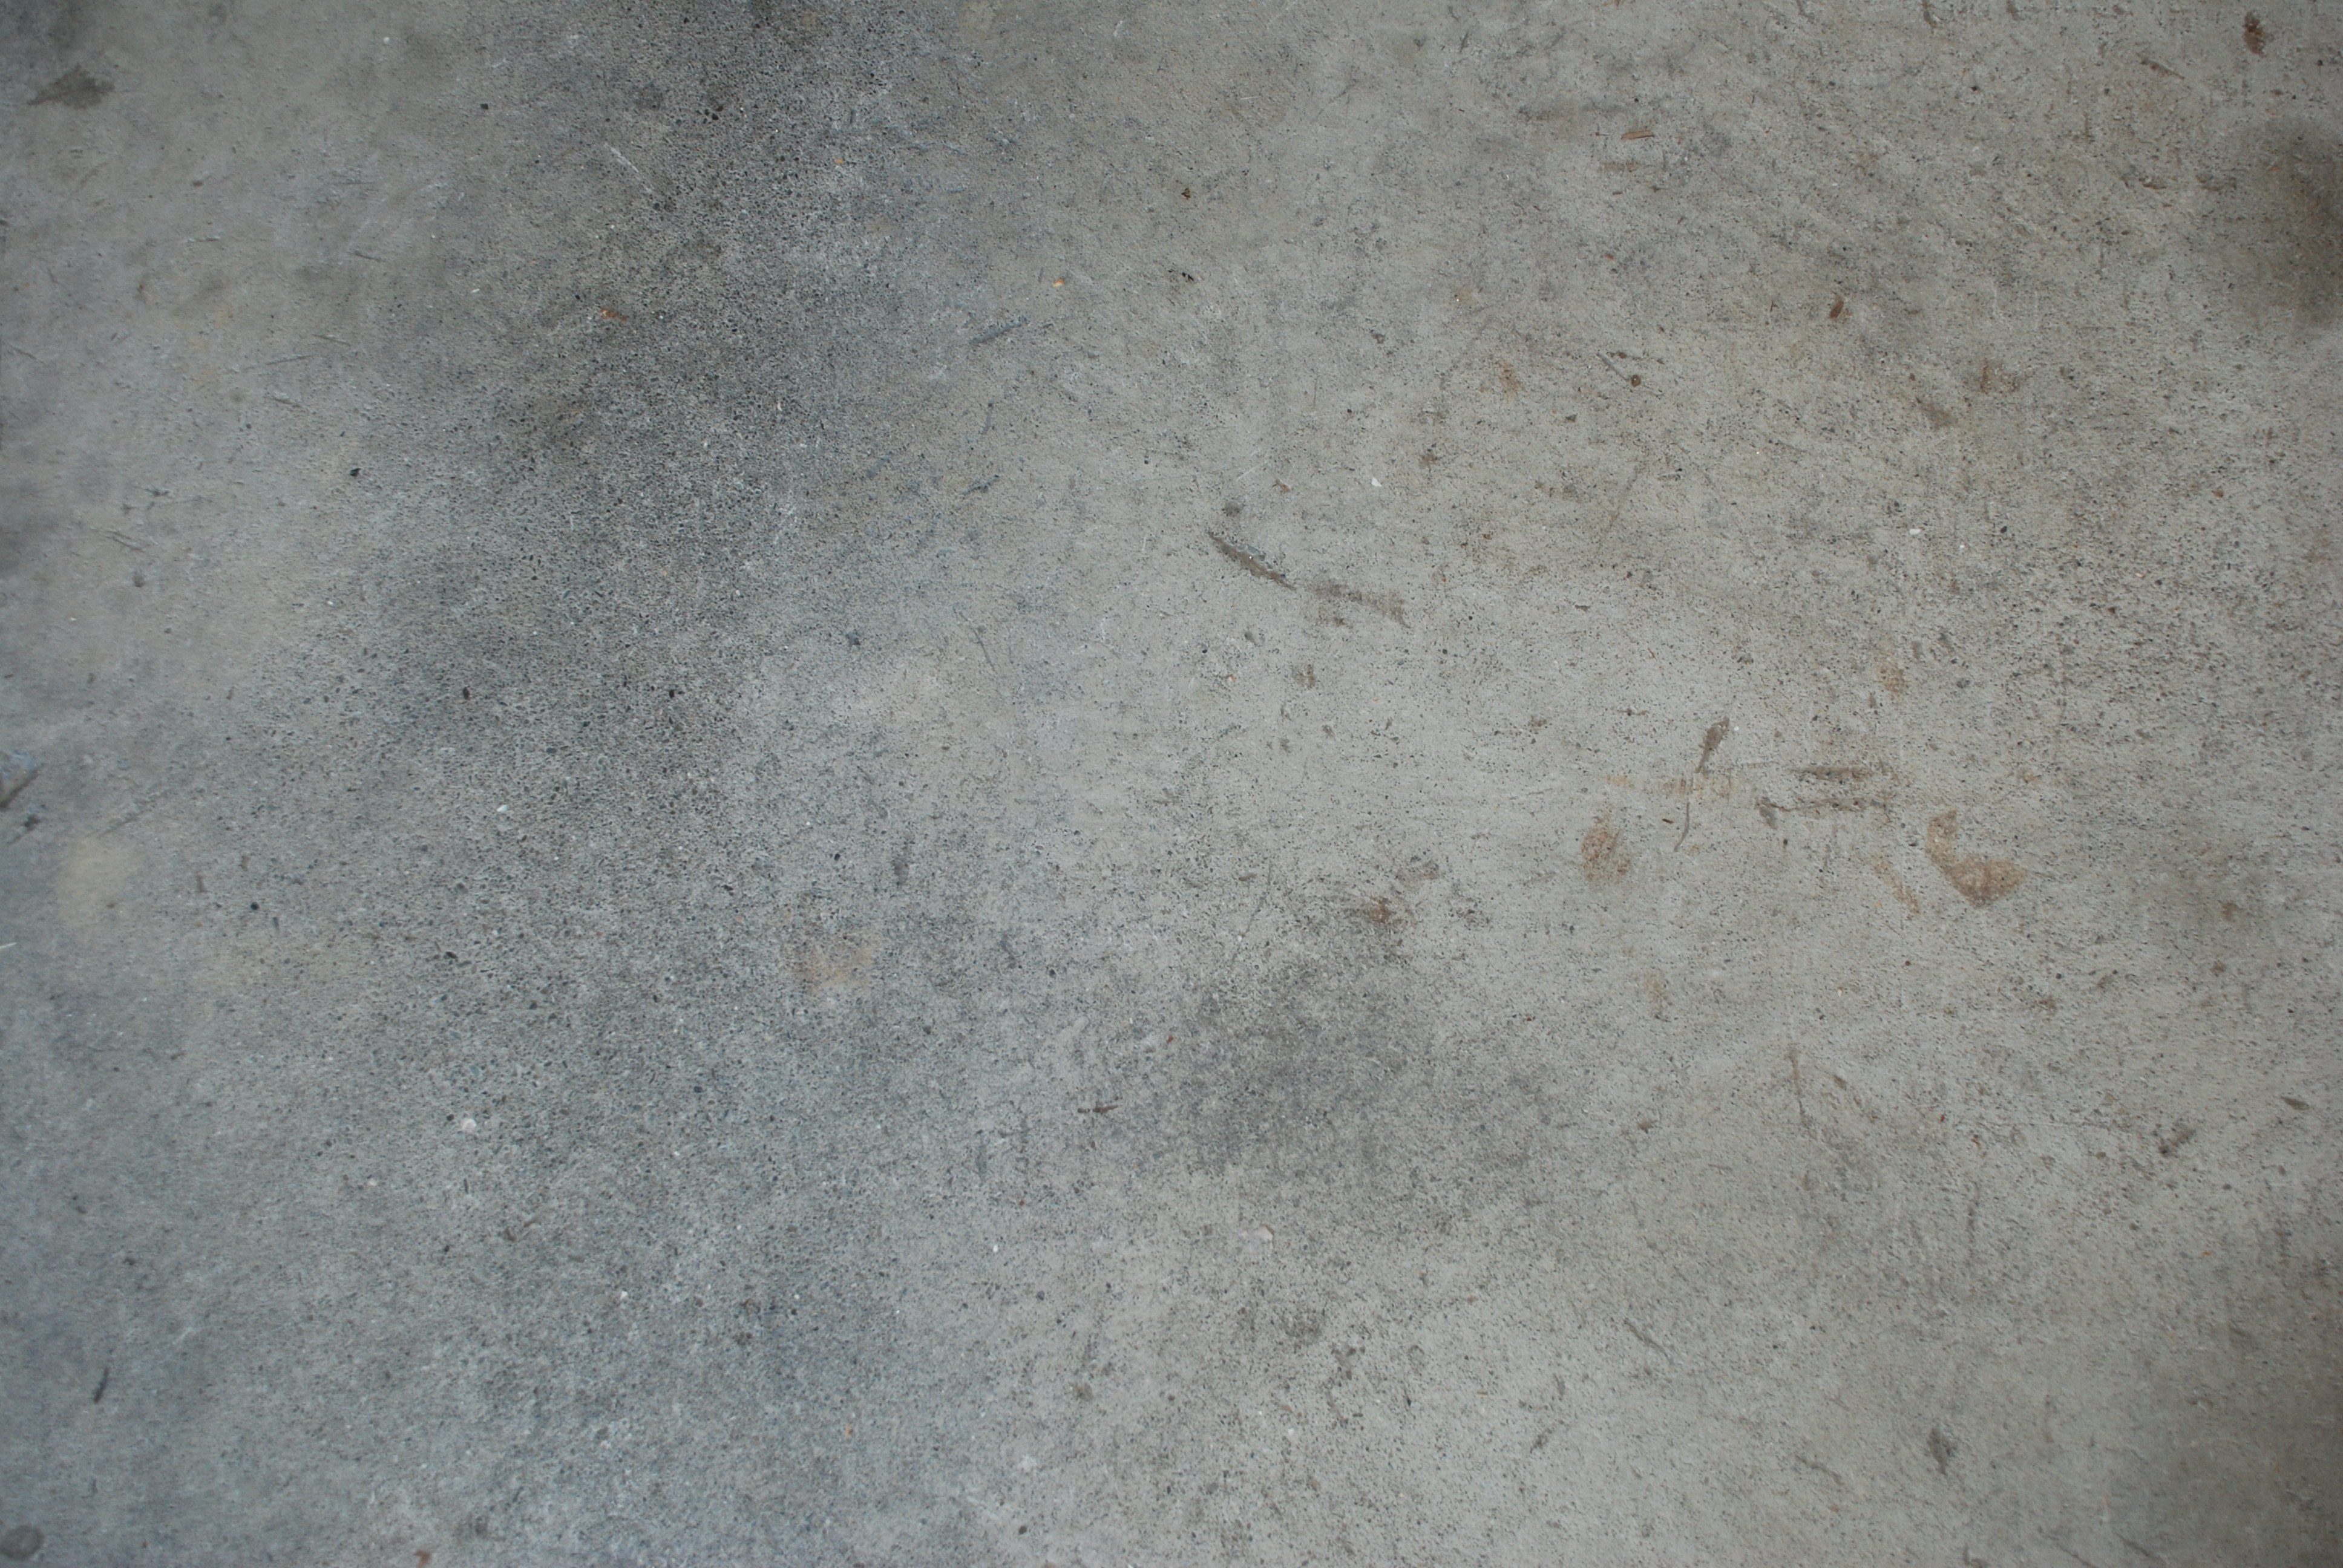 10 Free Concrete Textures; Cracked and Grunge Textures | Sycha Web ...